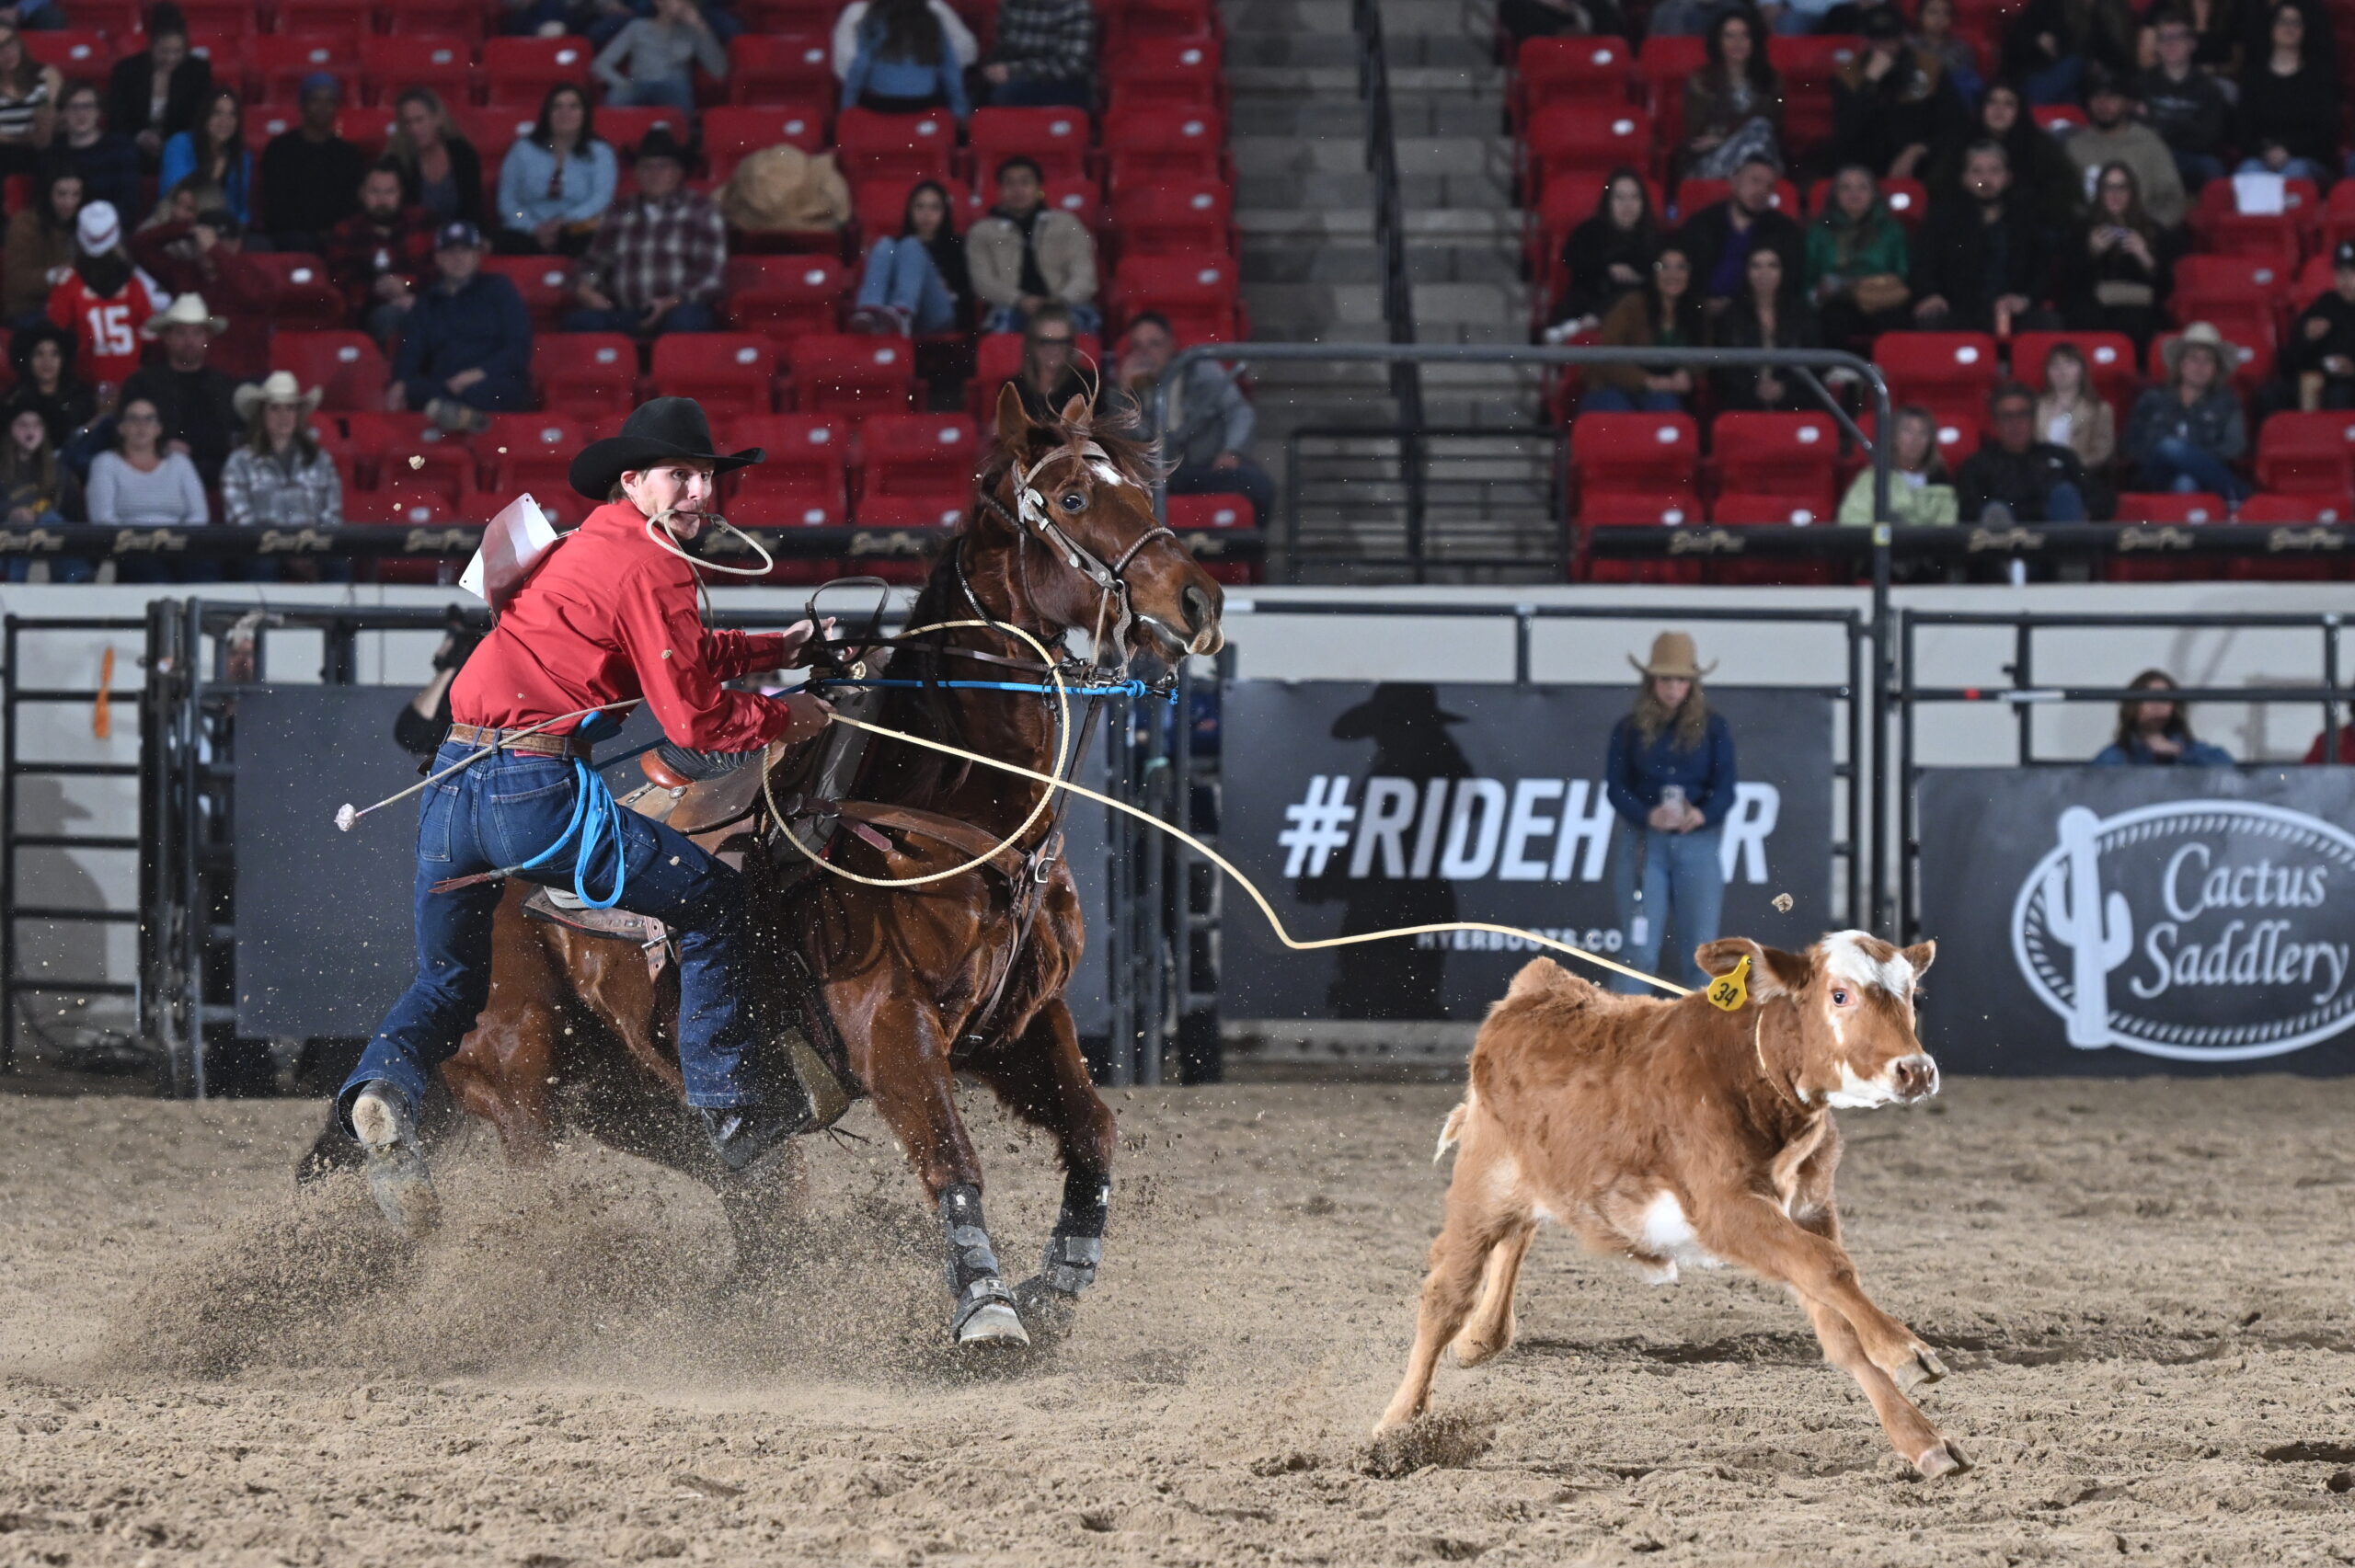 Colton Farquer qualified for The American Contender Finals via the Western Region with a time of 9.05 seconds in the short round.